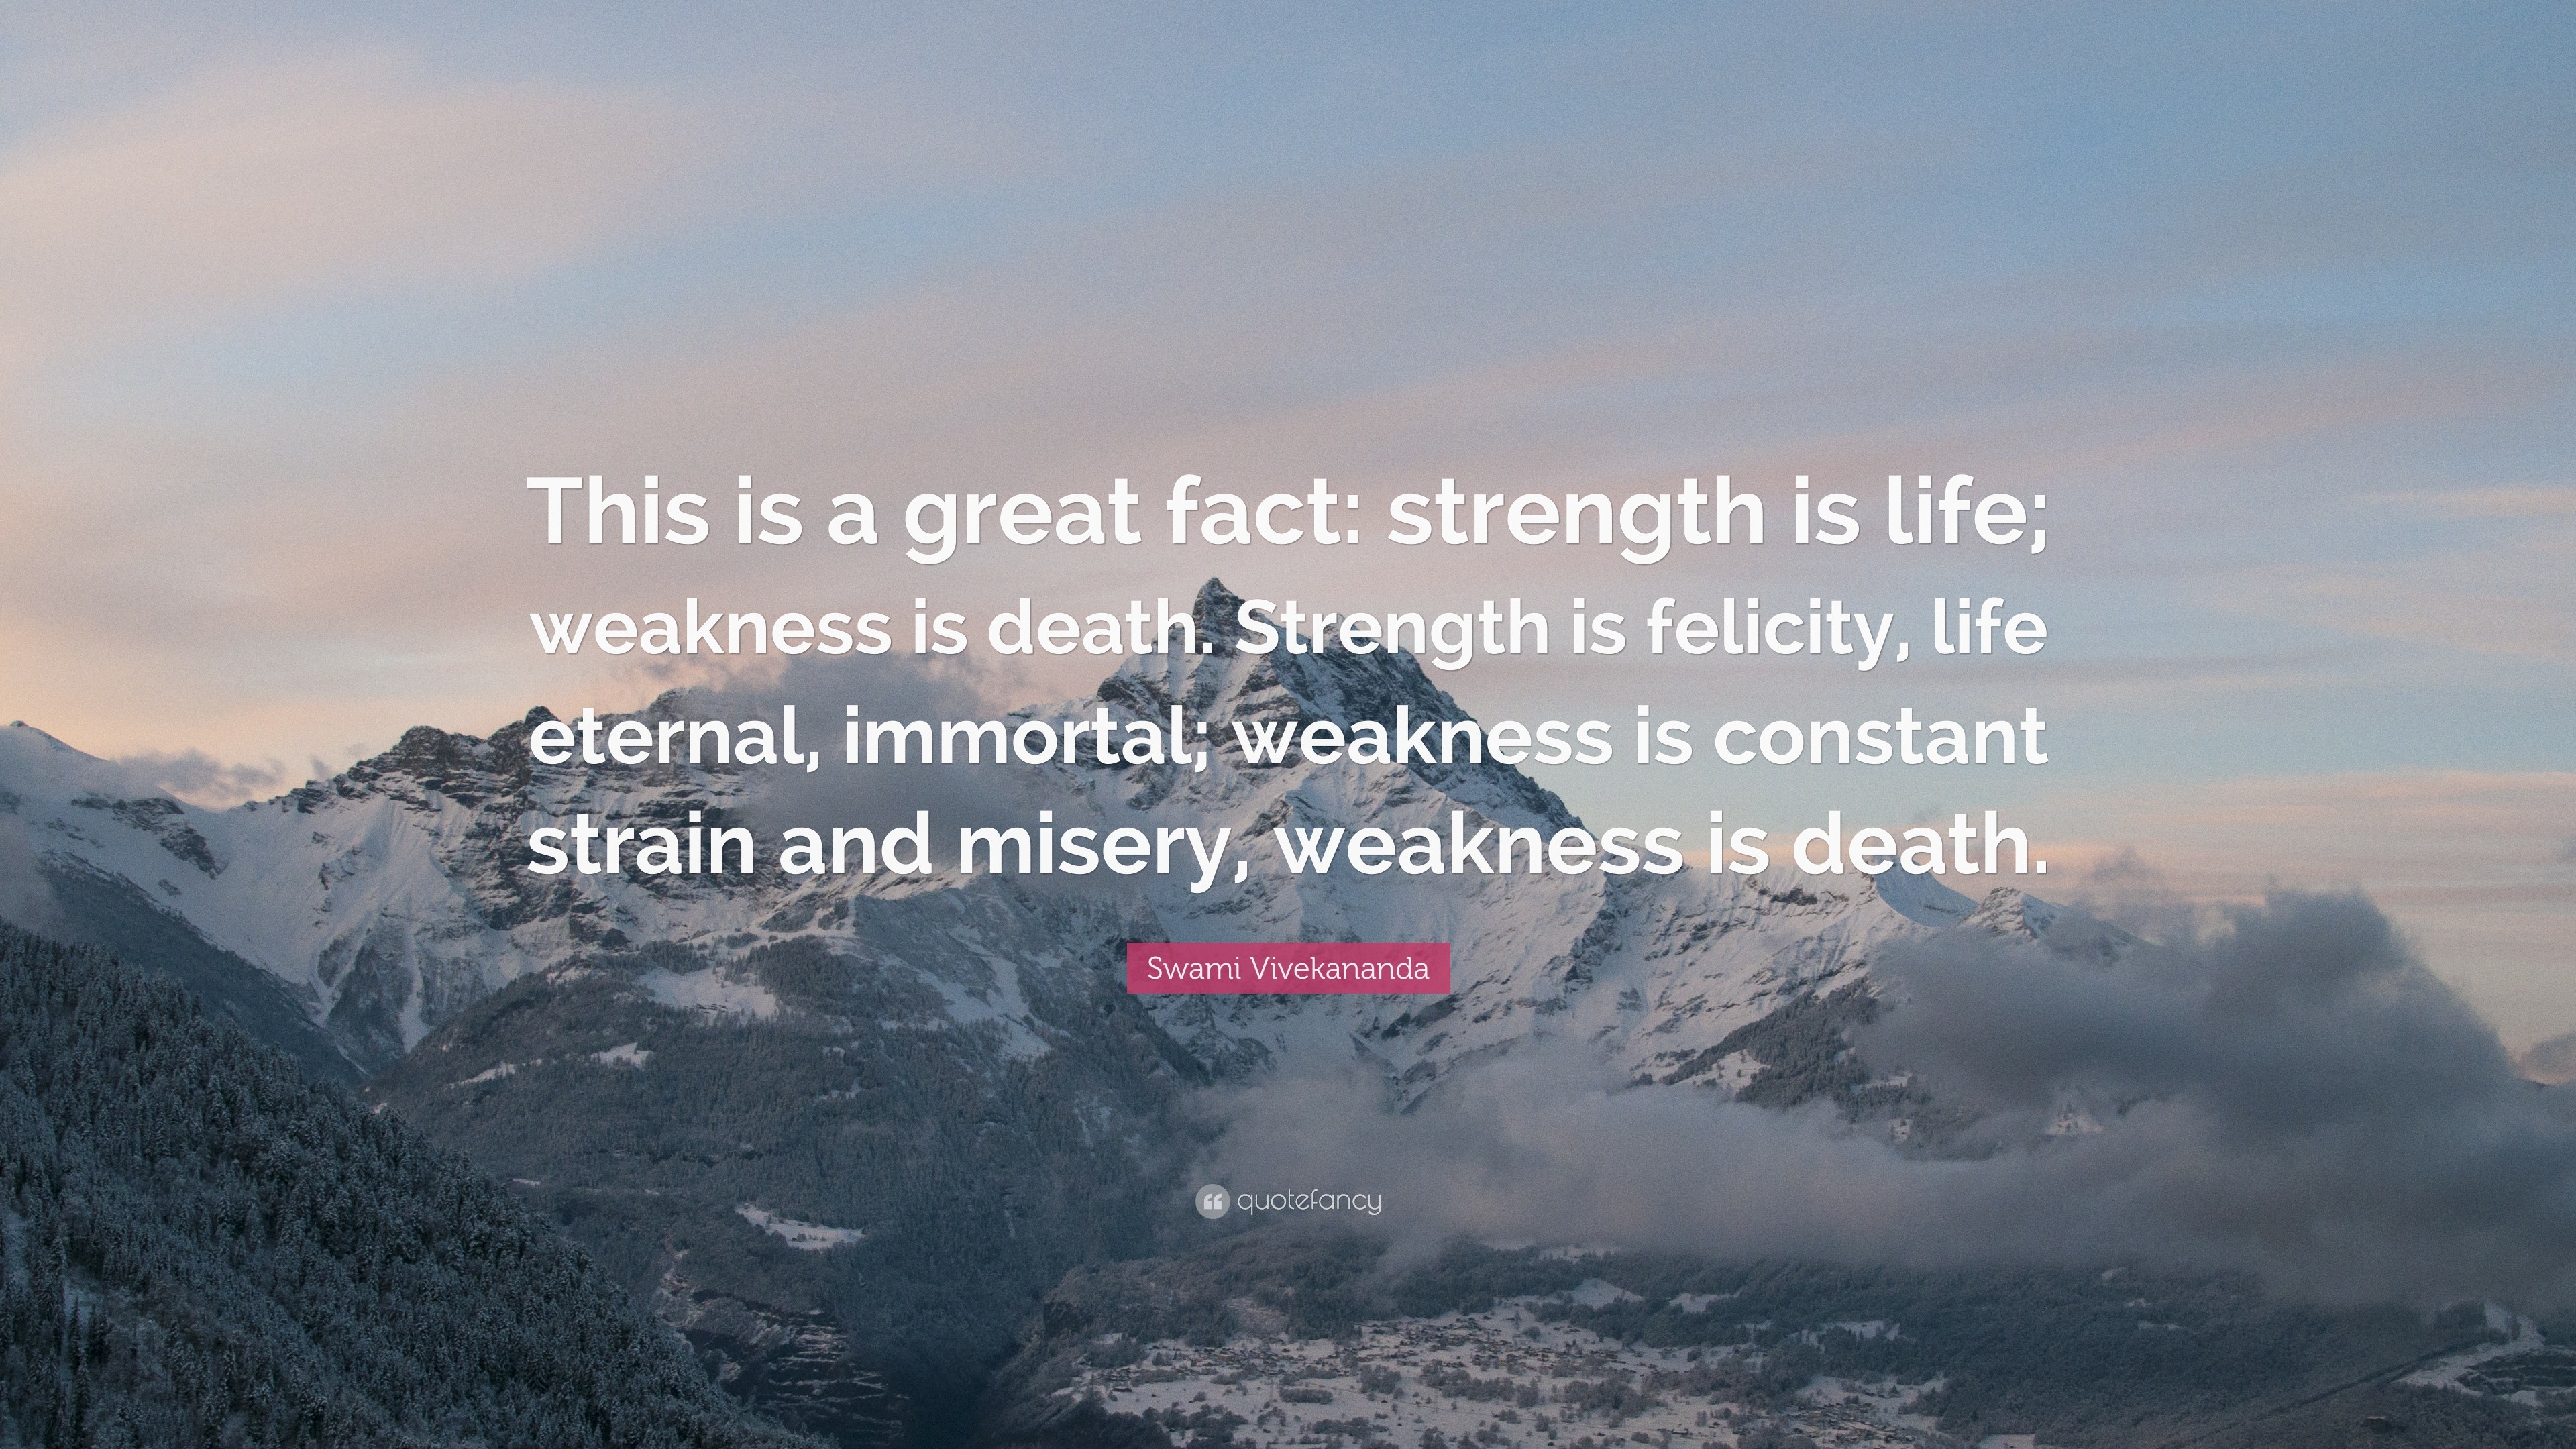 Swami Vivekananda Quote “This is a great fact strength is life weakness